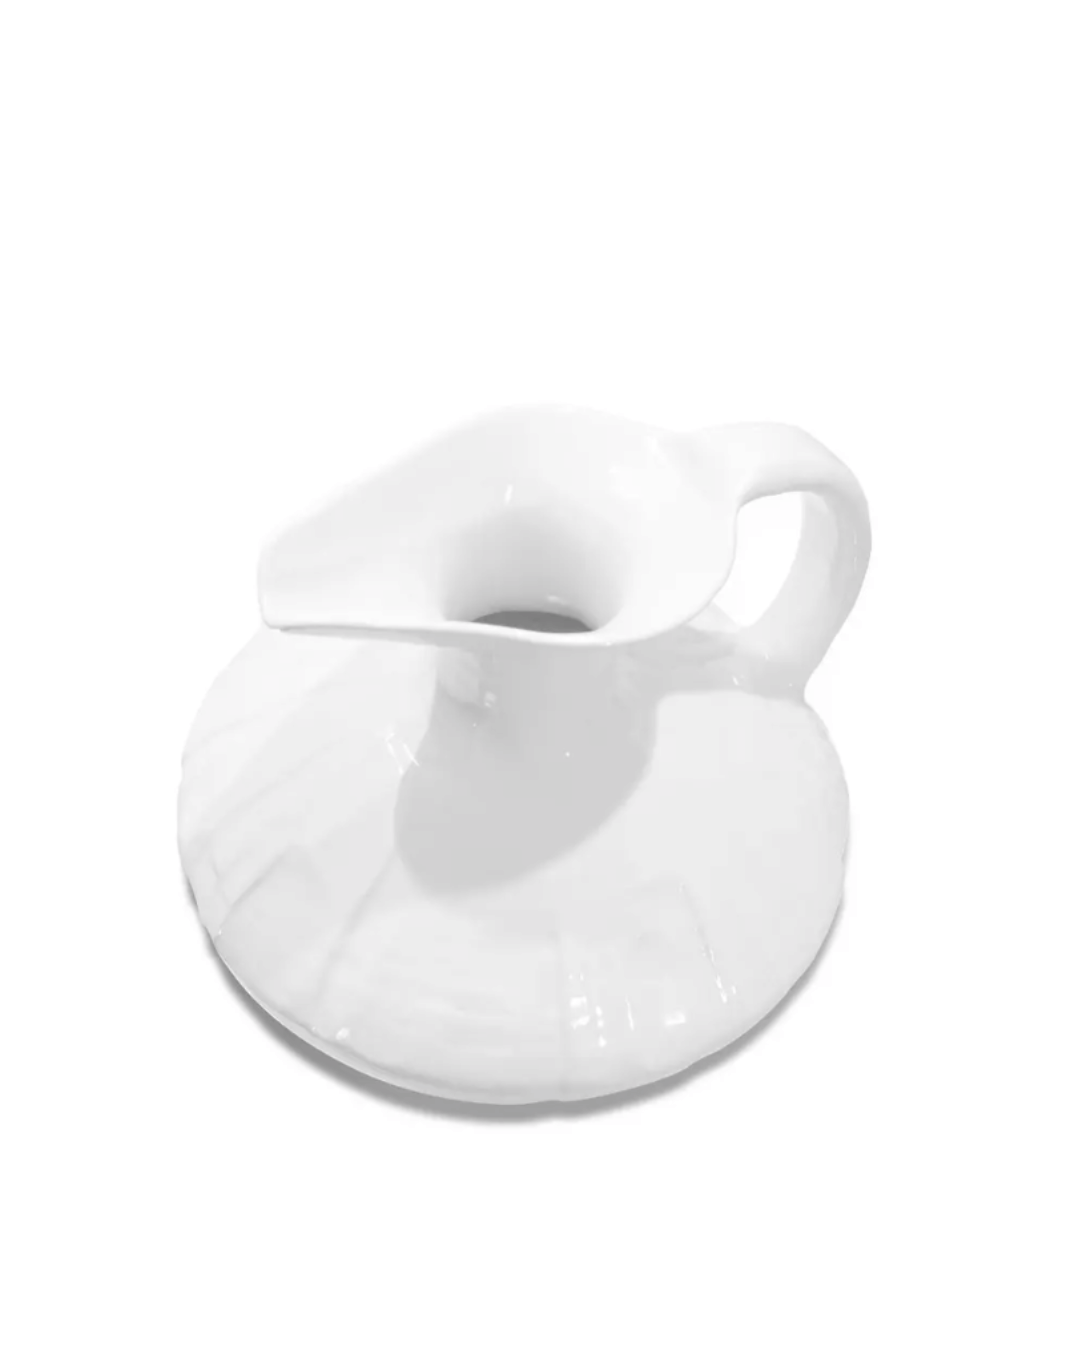 A glossy white ceramic Pitcher No. 431 from Montes Doggett, with an innovative design featuring an integrated coaster attached to its base, set against a white background in a Scottsdale Arizona bungalow.